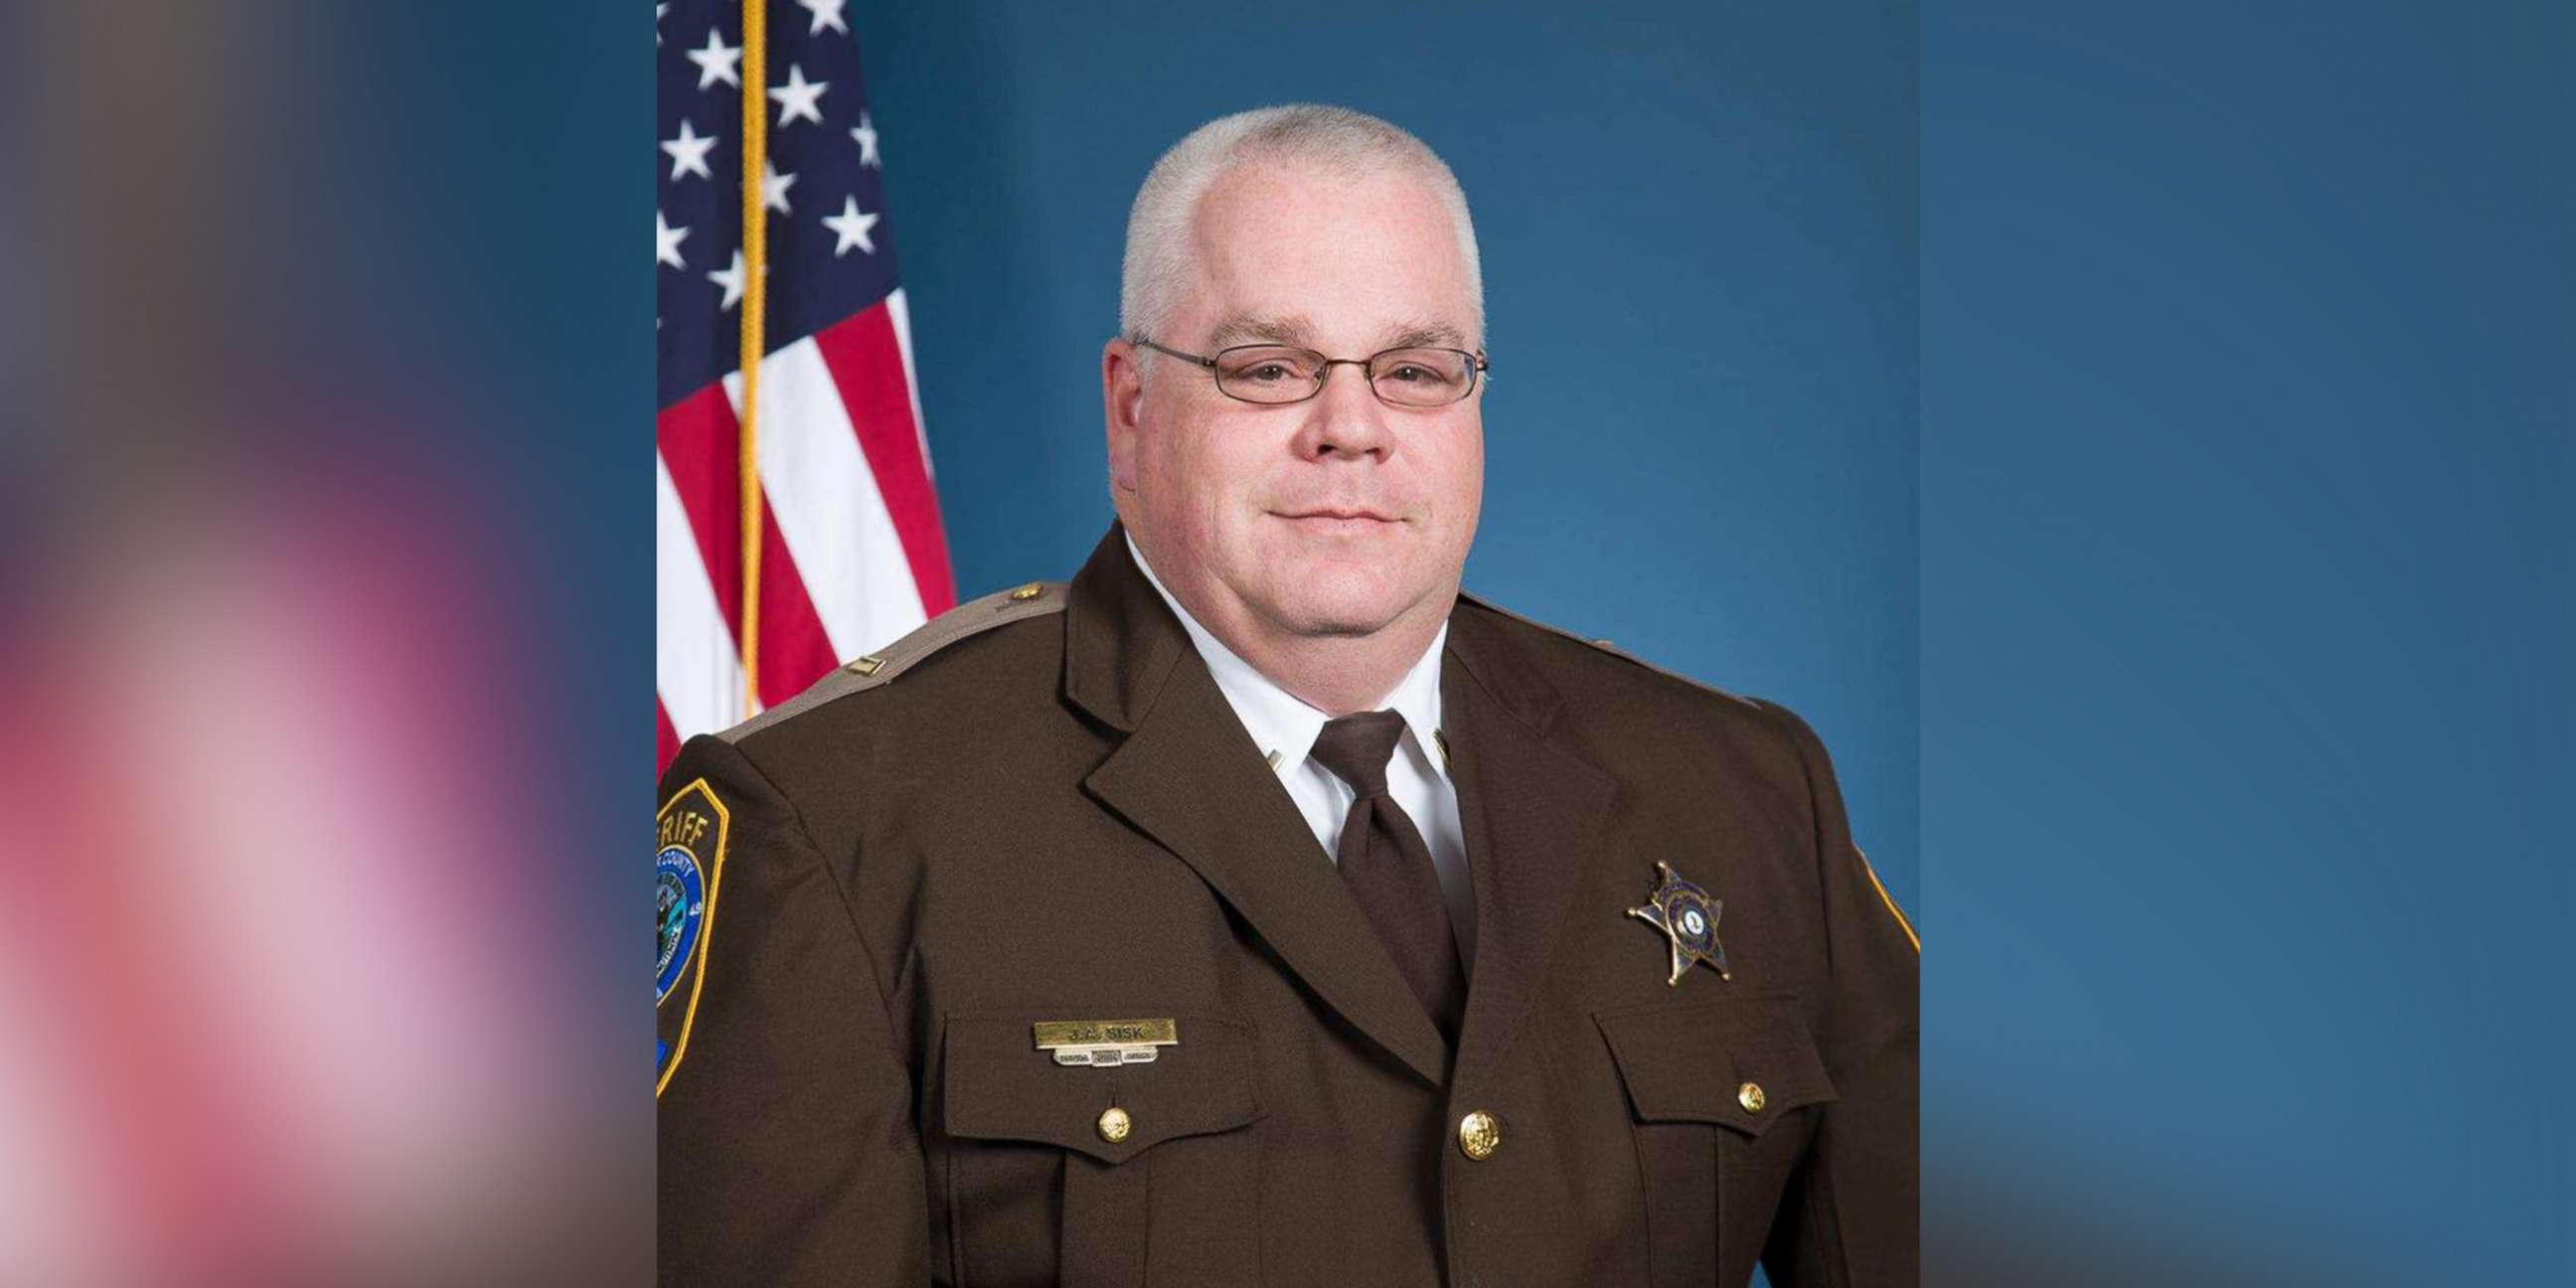 PHOTO: Culpeper County, Virginia Sheriff's Department Captain James Anthony "Tony" Sisk is pictured in an undated handout photo. Sisk died of COVID-19 on Oct. 1, 2021.